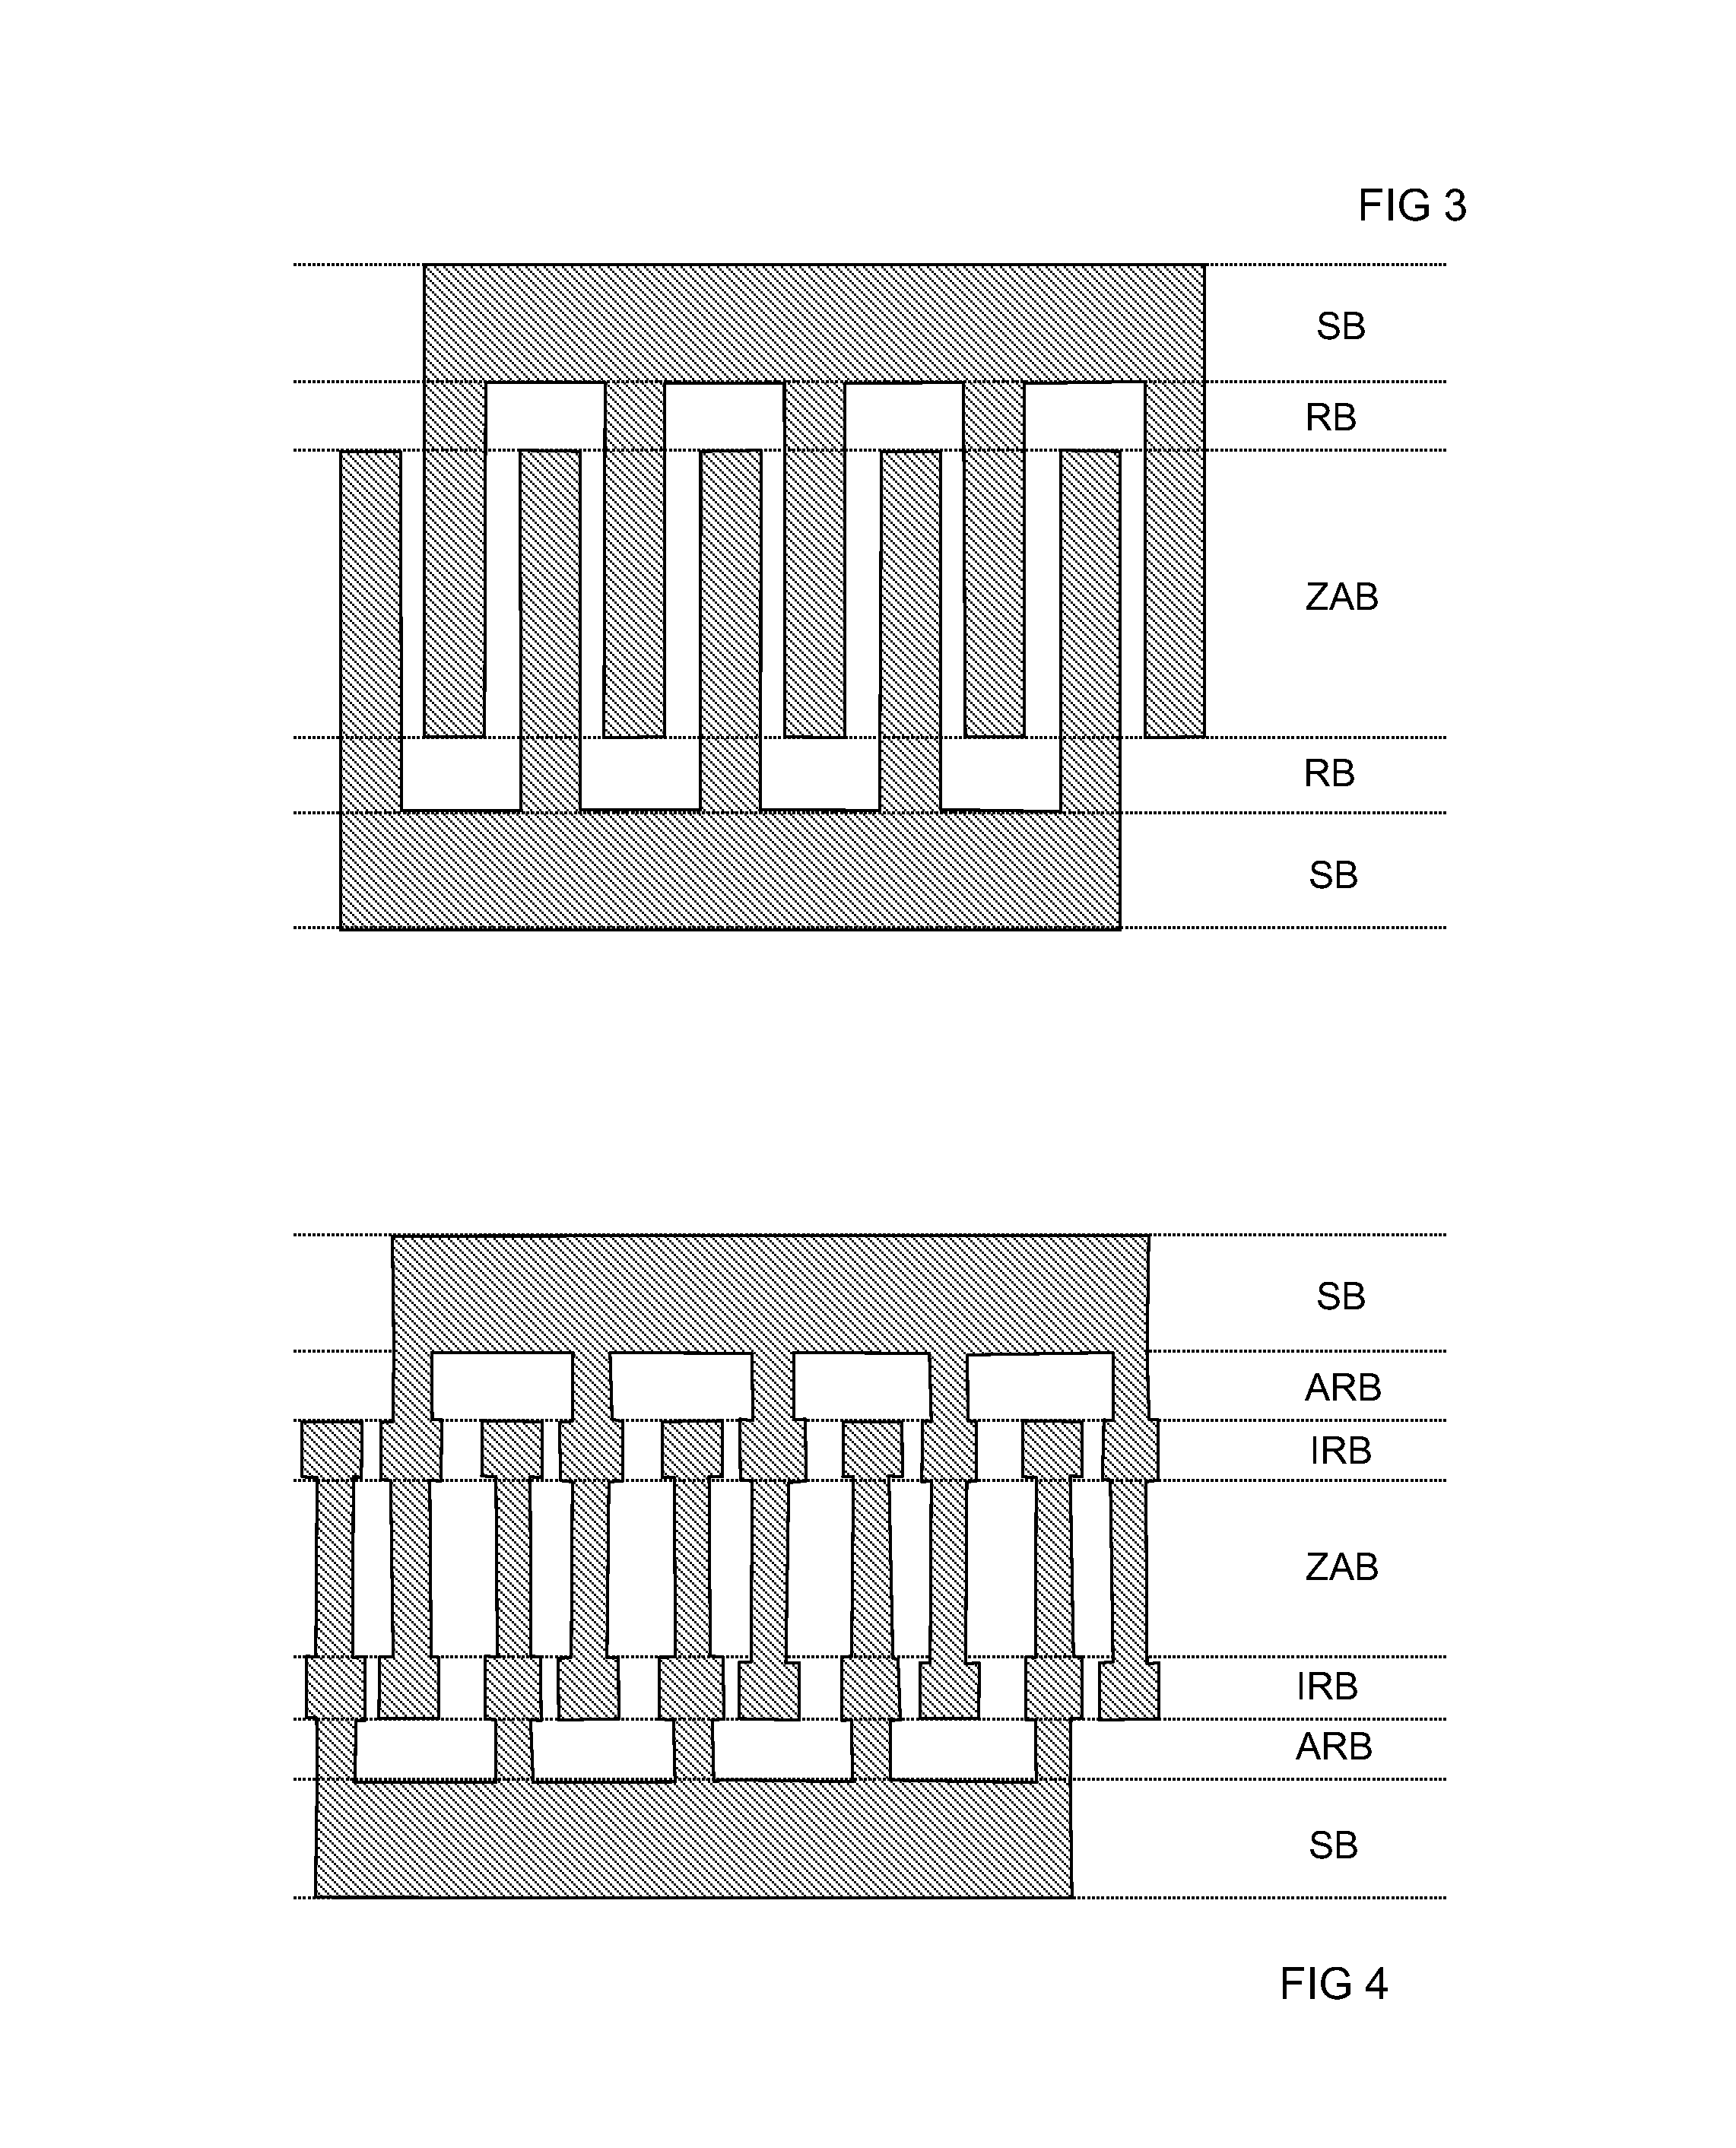 Electroacoustic transducer having reduced losses due to transverse emission and improved performance due to suppression of transverse modes